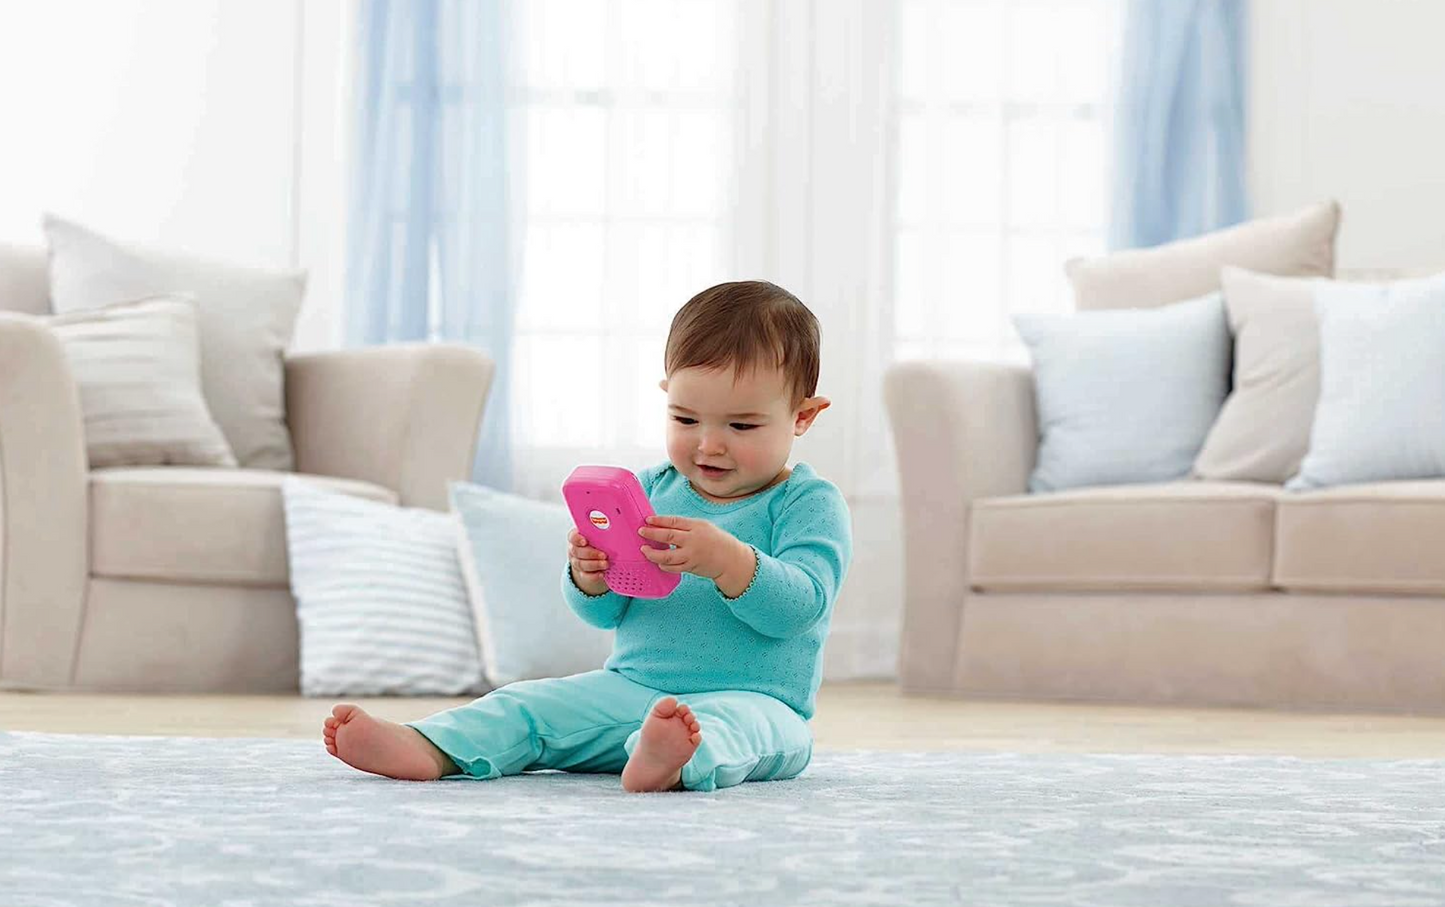 Fisher-Price Laugh & Learn Baby & Toddler Toy Smart Phone With Educational Music & Lights For Ages 6+ Months, Pink